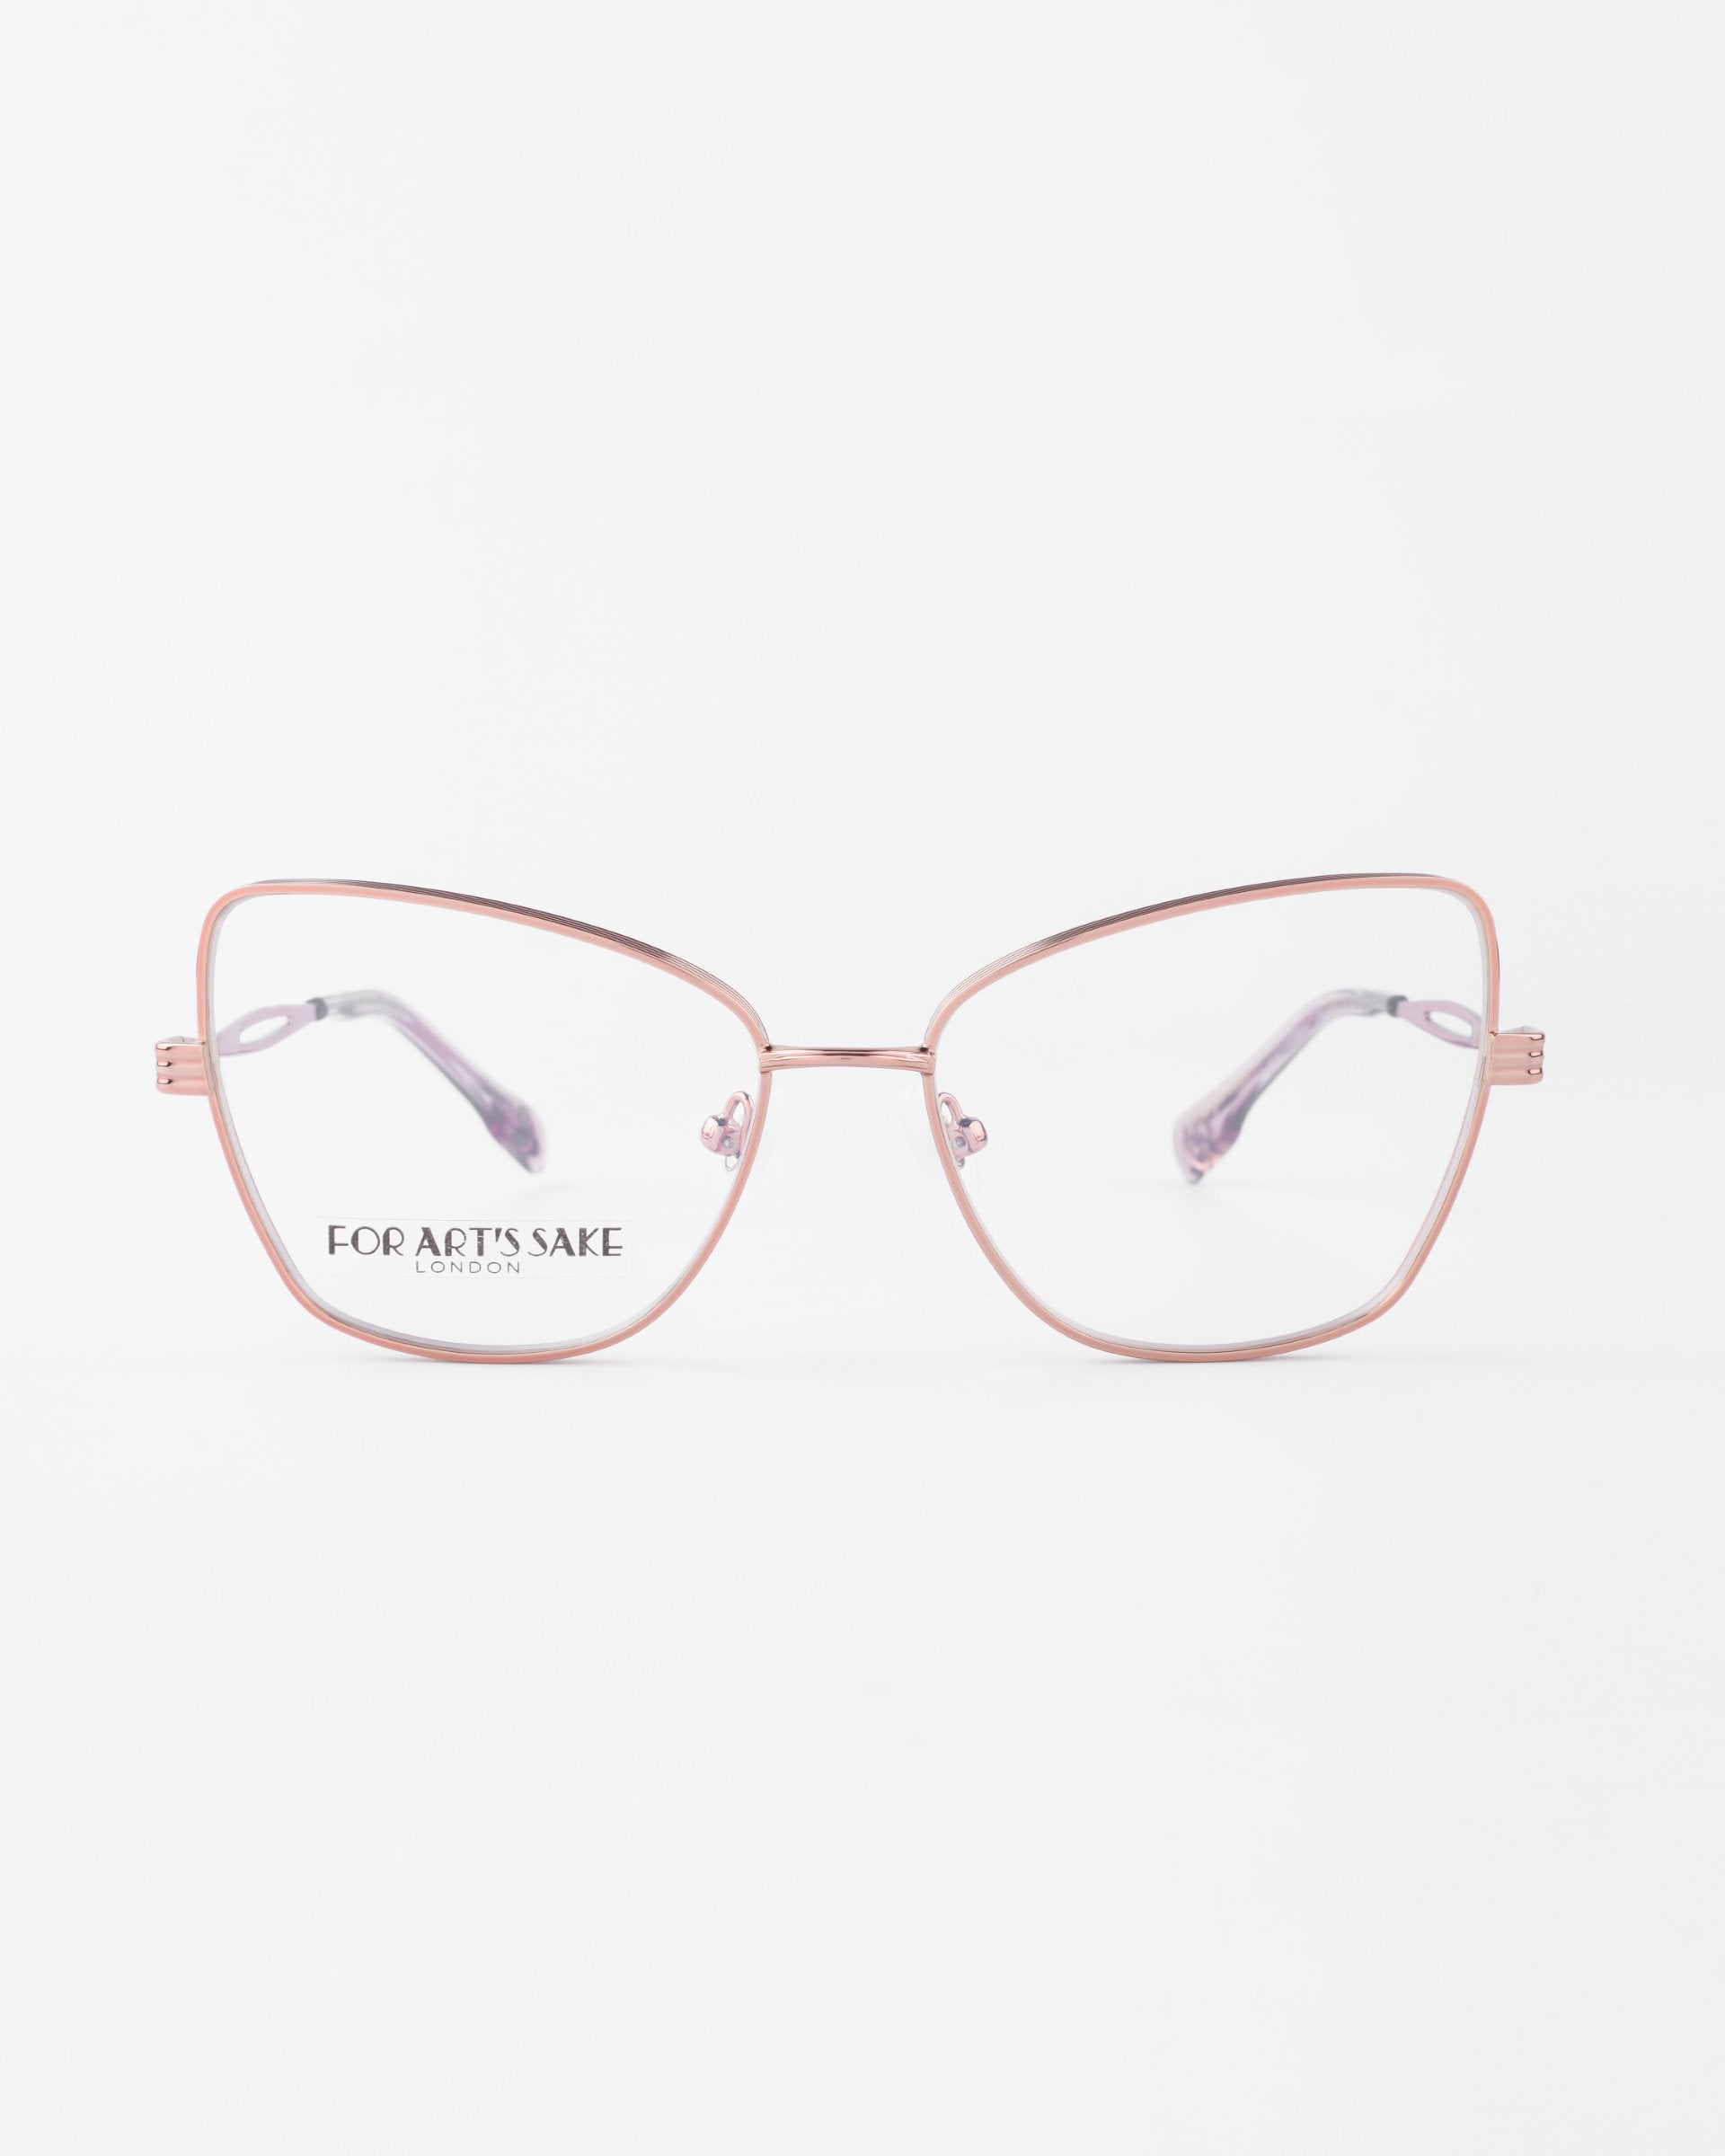 A pair of Lady by For Art&#39;s Sake® eyeglasses with rose gold metal frames and clear lenses. The frame features a modern, geometric cat-eye silhouette with subtle design details on the temples, set against a plain white background.